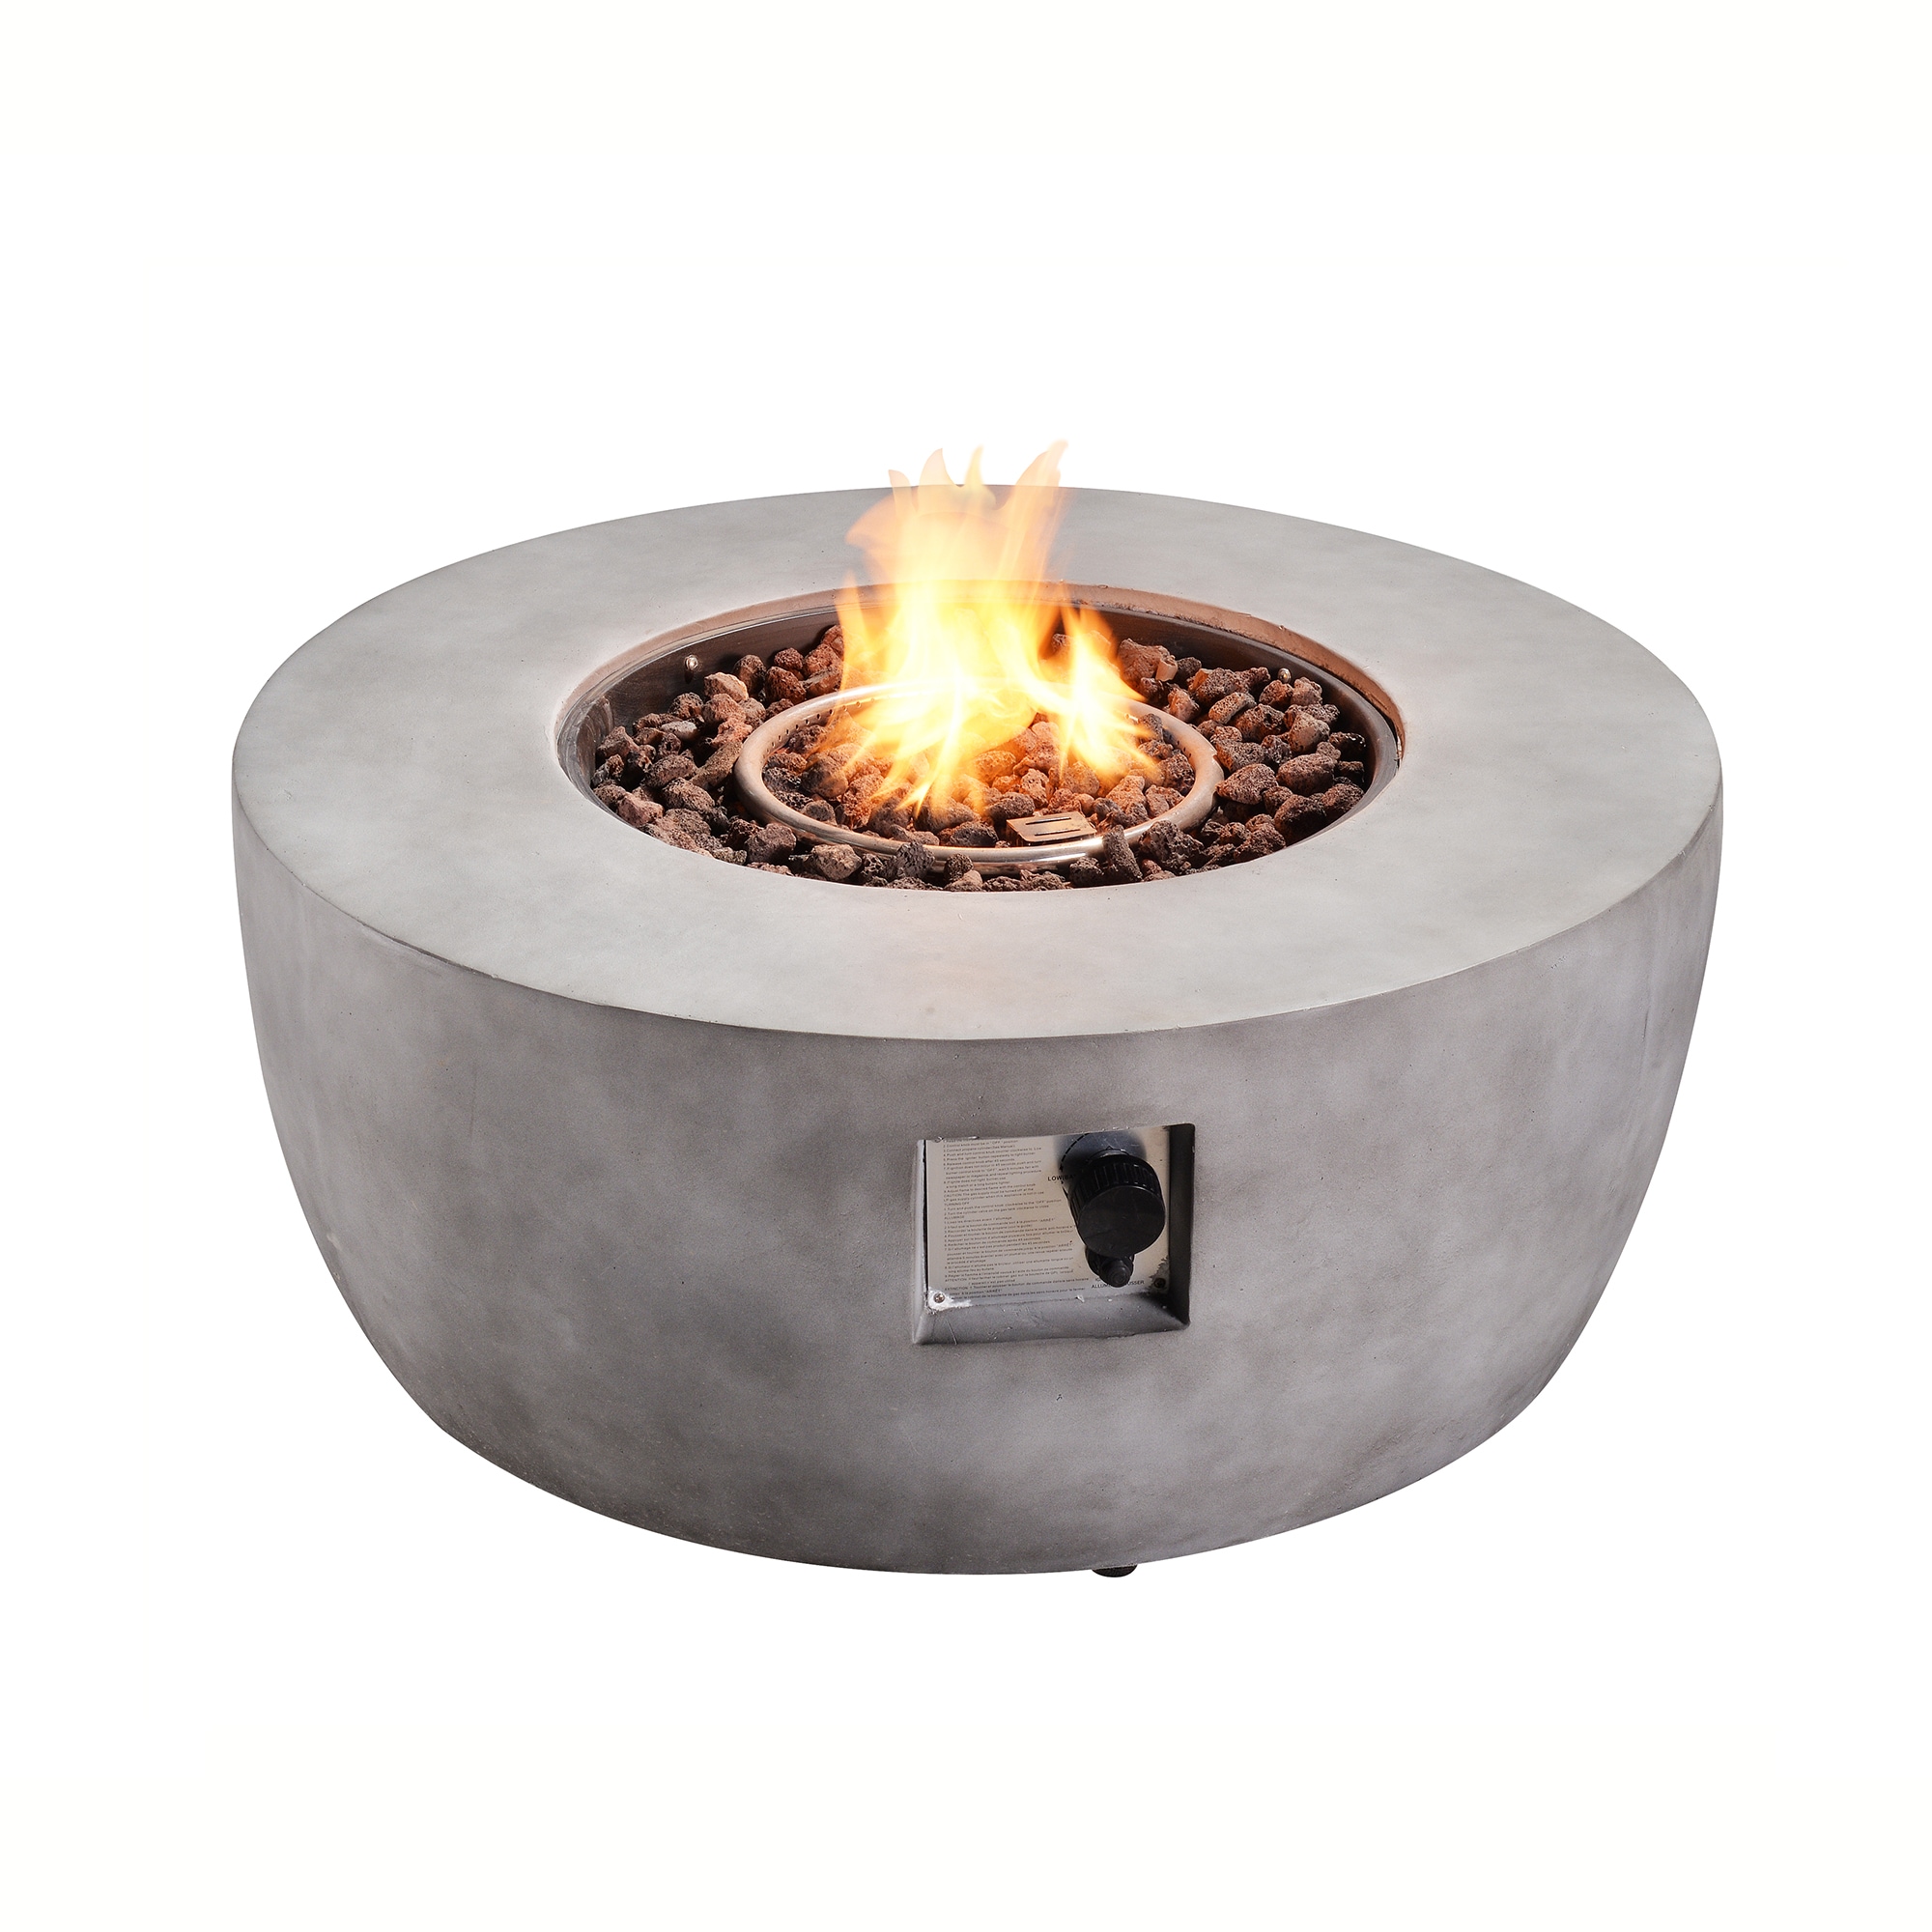 Teamson Home Propane Fire Pits 36 In W 50000 Btu Light Grey Concrete Propane Gas Fire Pit In The Gas Fire Pits Department At Lowes Com